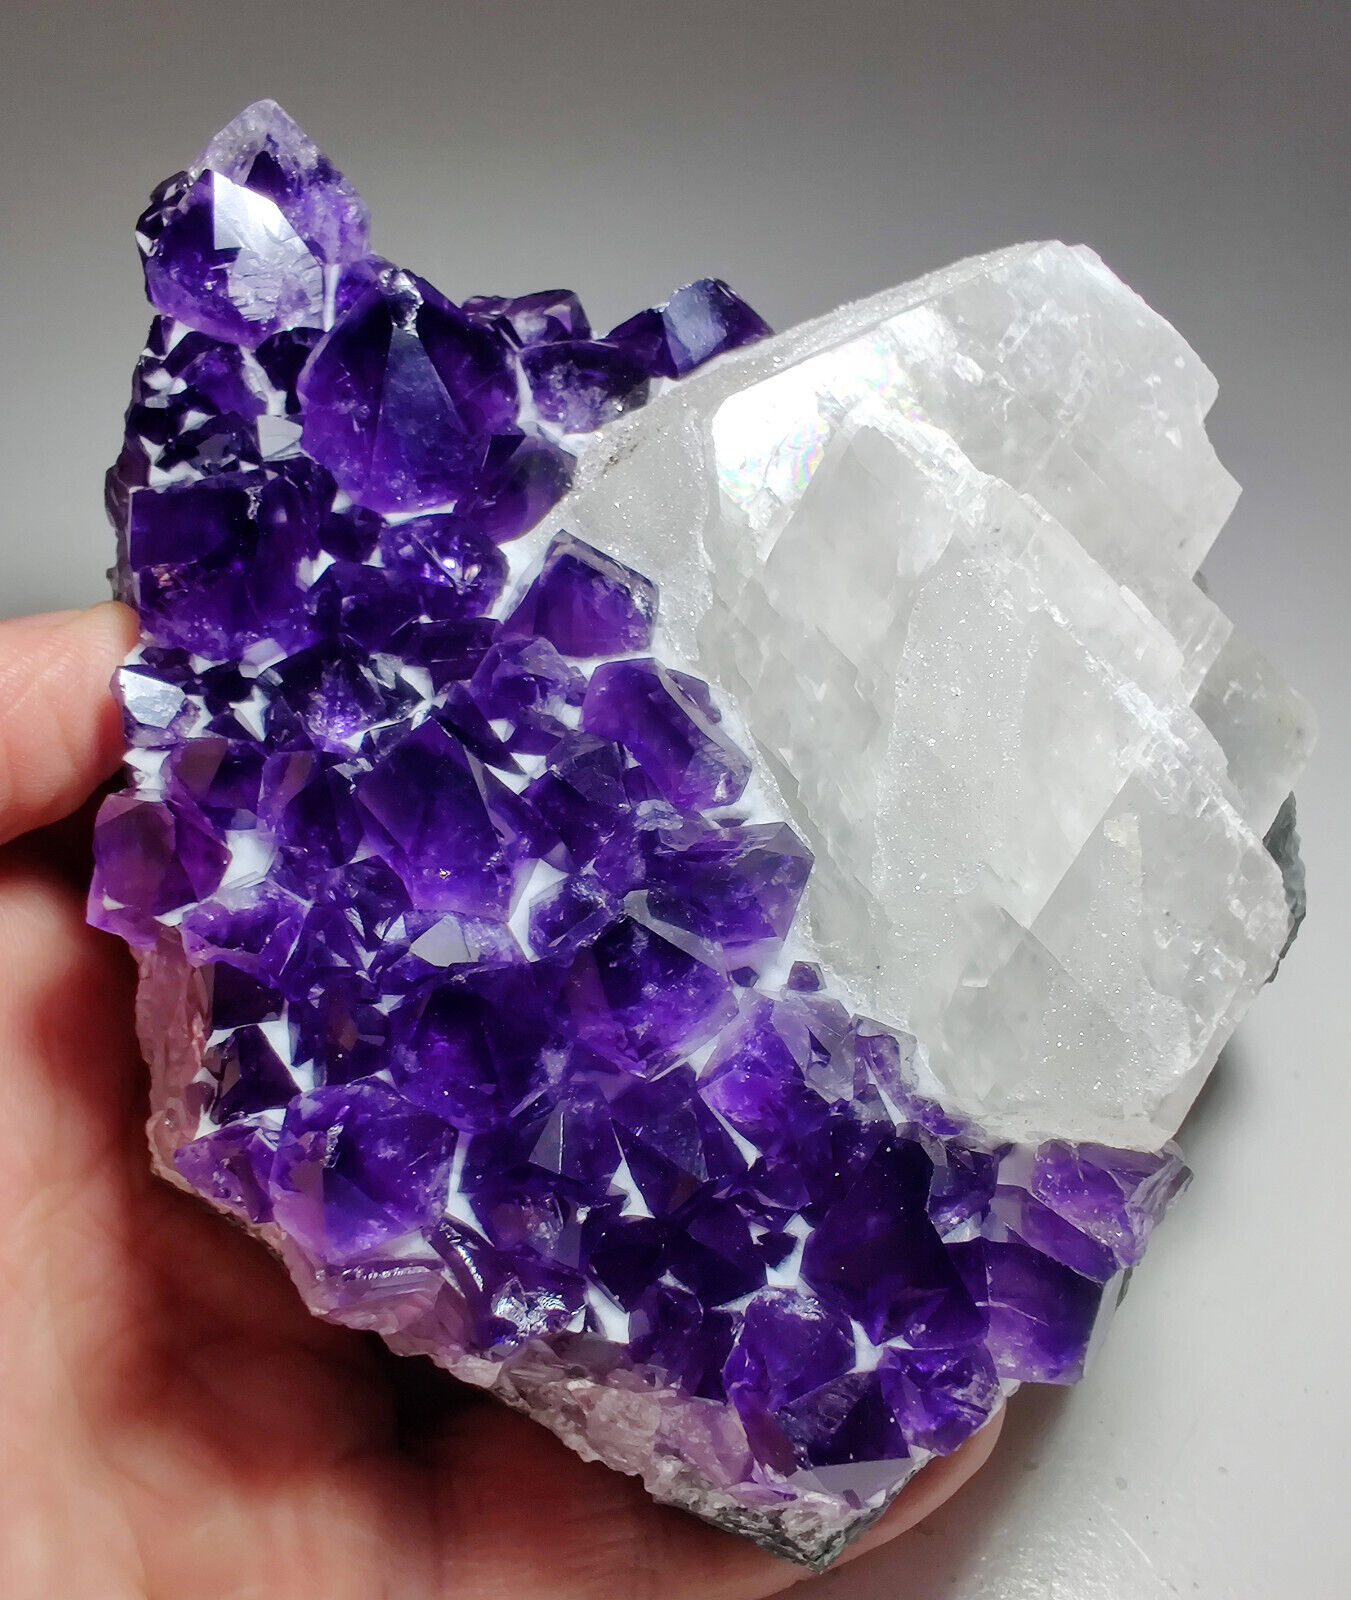 Amethyst crystals with Calcite nice sized display piece. Brazil. 2.2 lbs. Video.